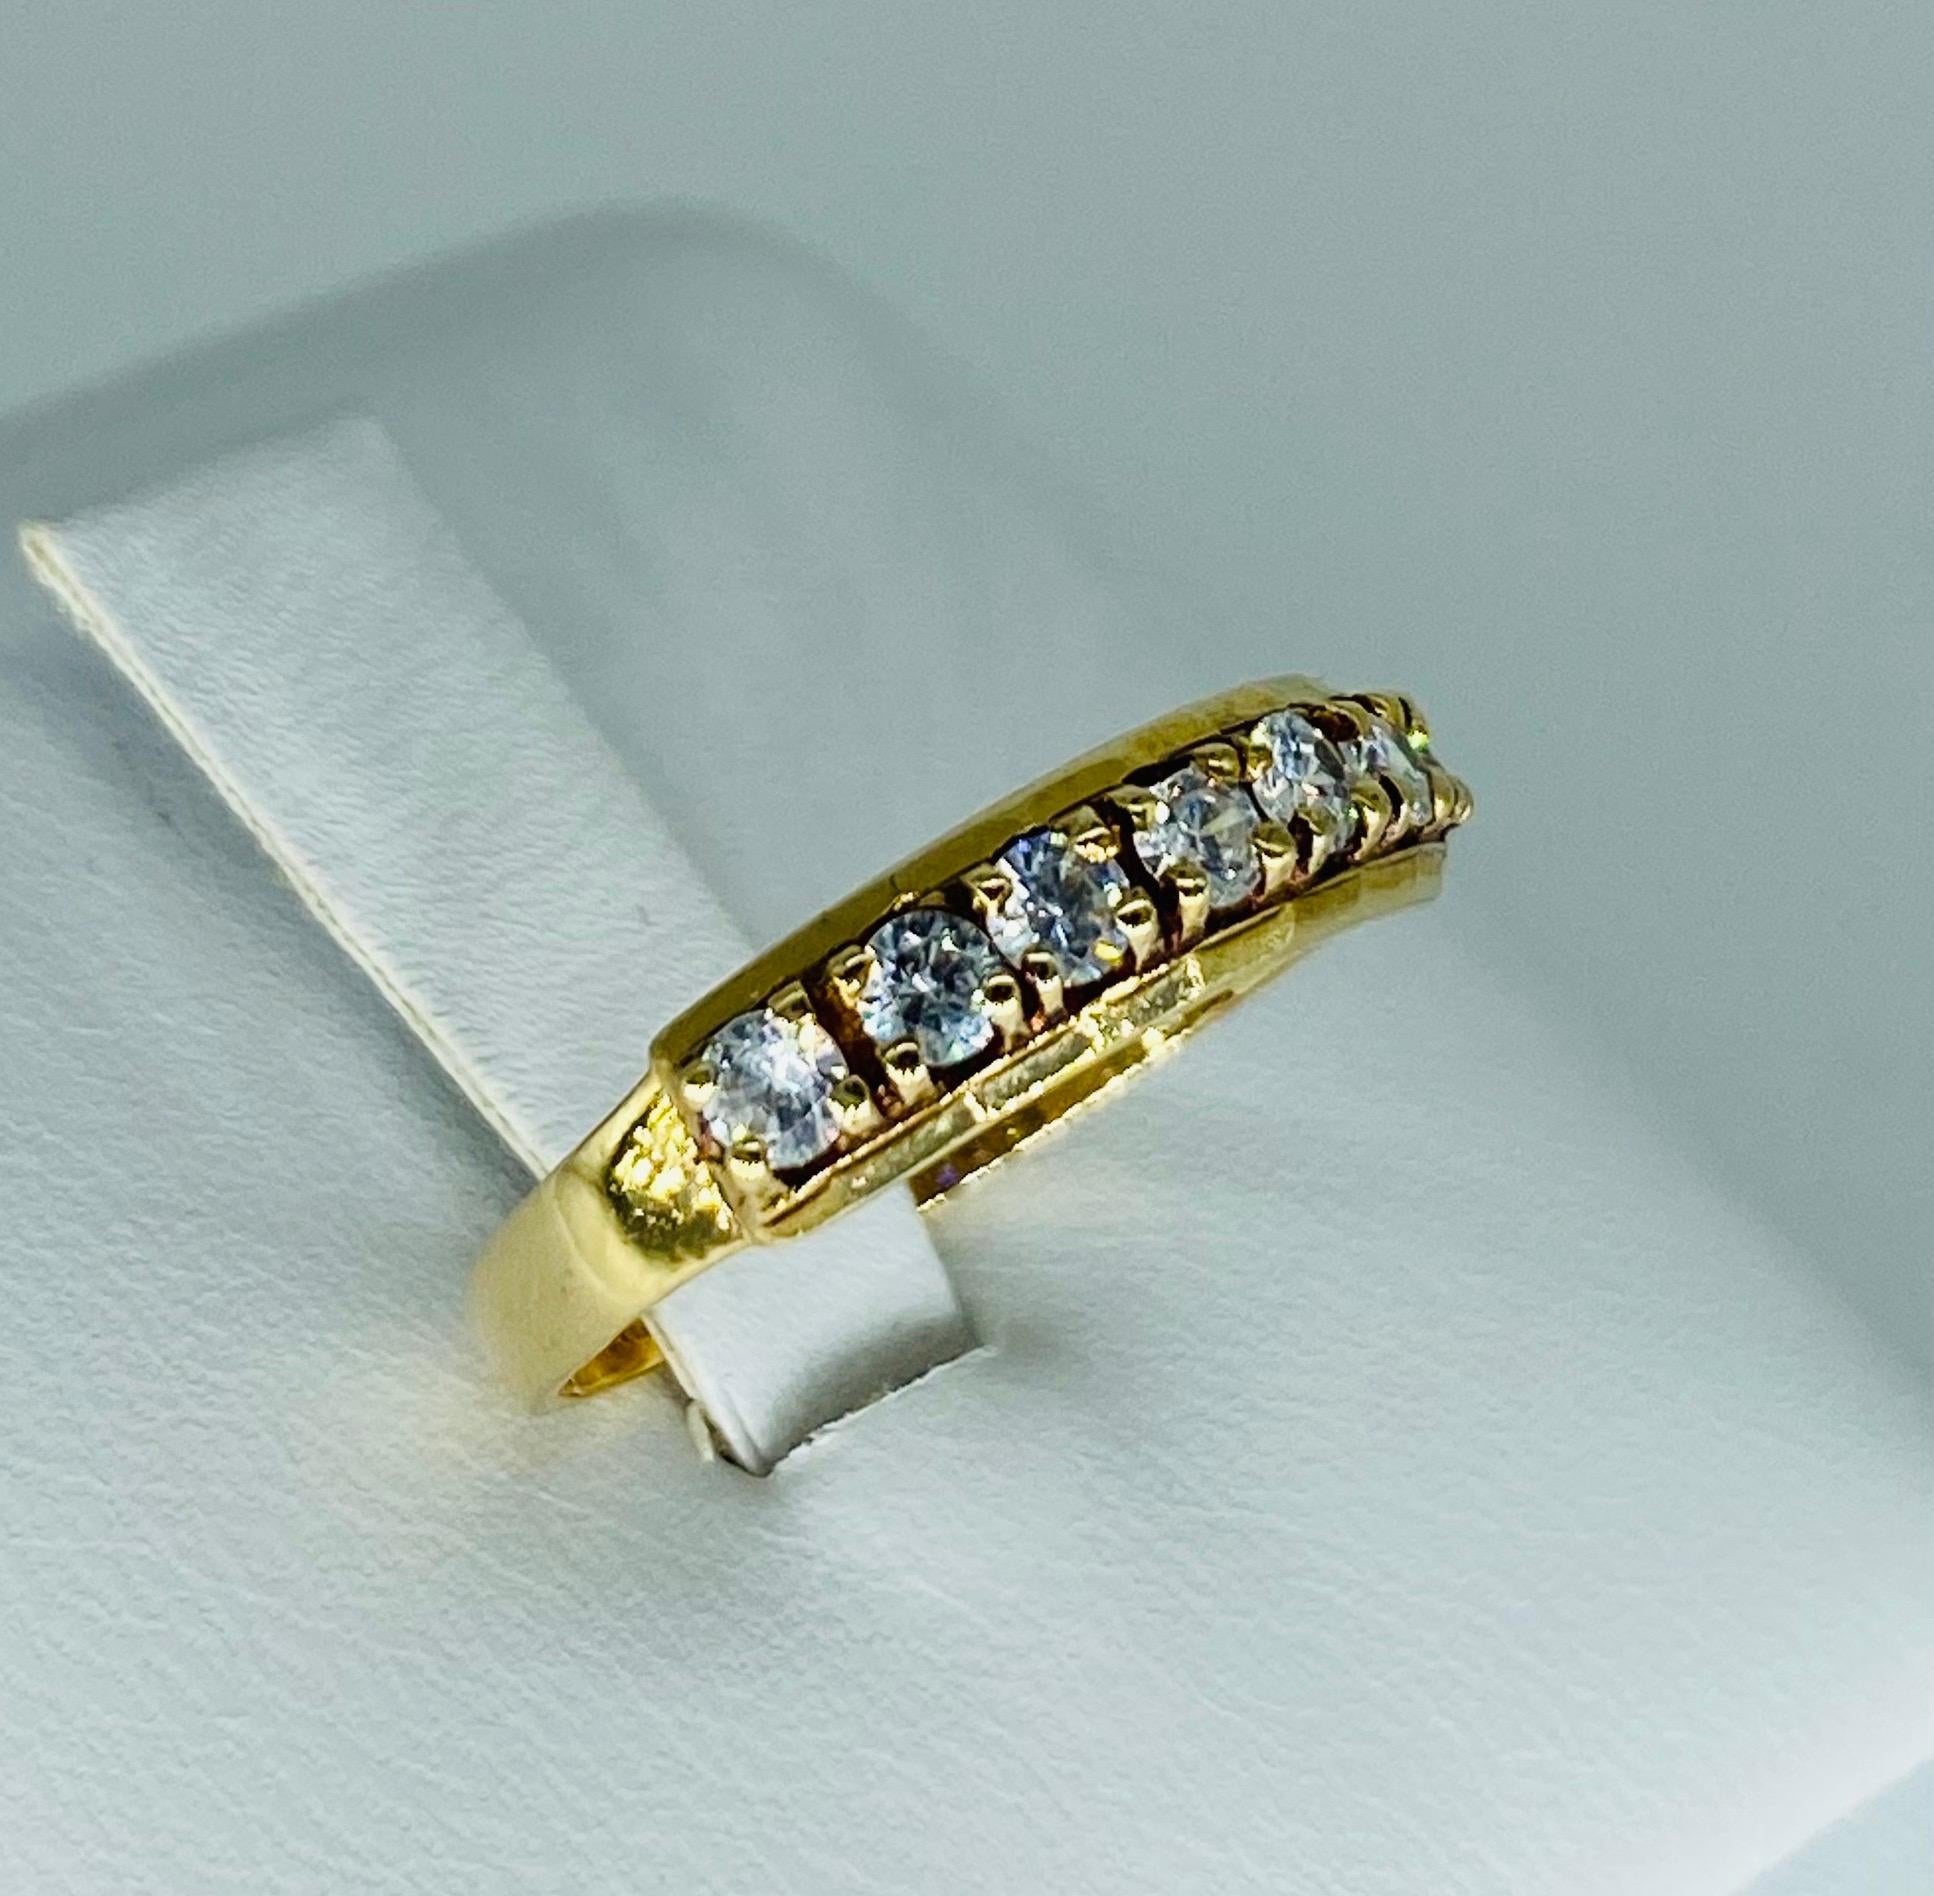 Antique 0.70 Carat Diamond Half Eternity Ring m. Beautiful ring featuring 7 diamonds totaling 0.70 carat approx. the ring is a size 6.5 and weights 2.2 grams 14k solid gold.